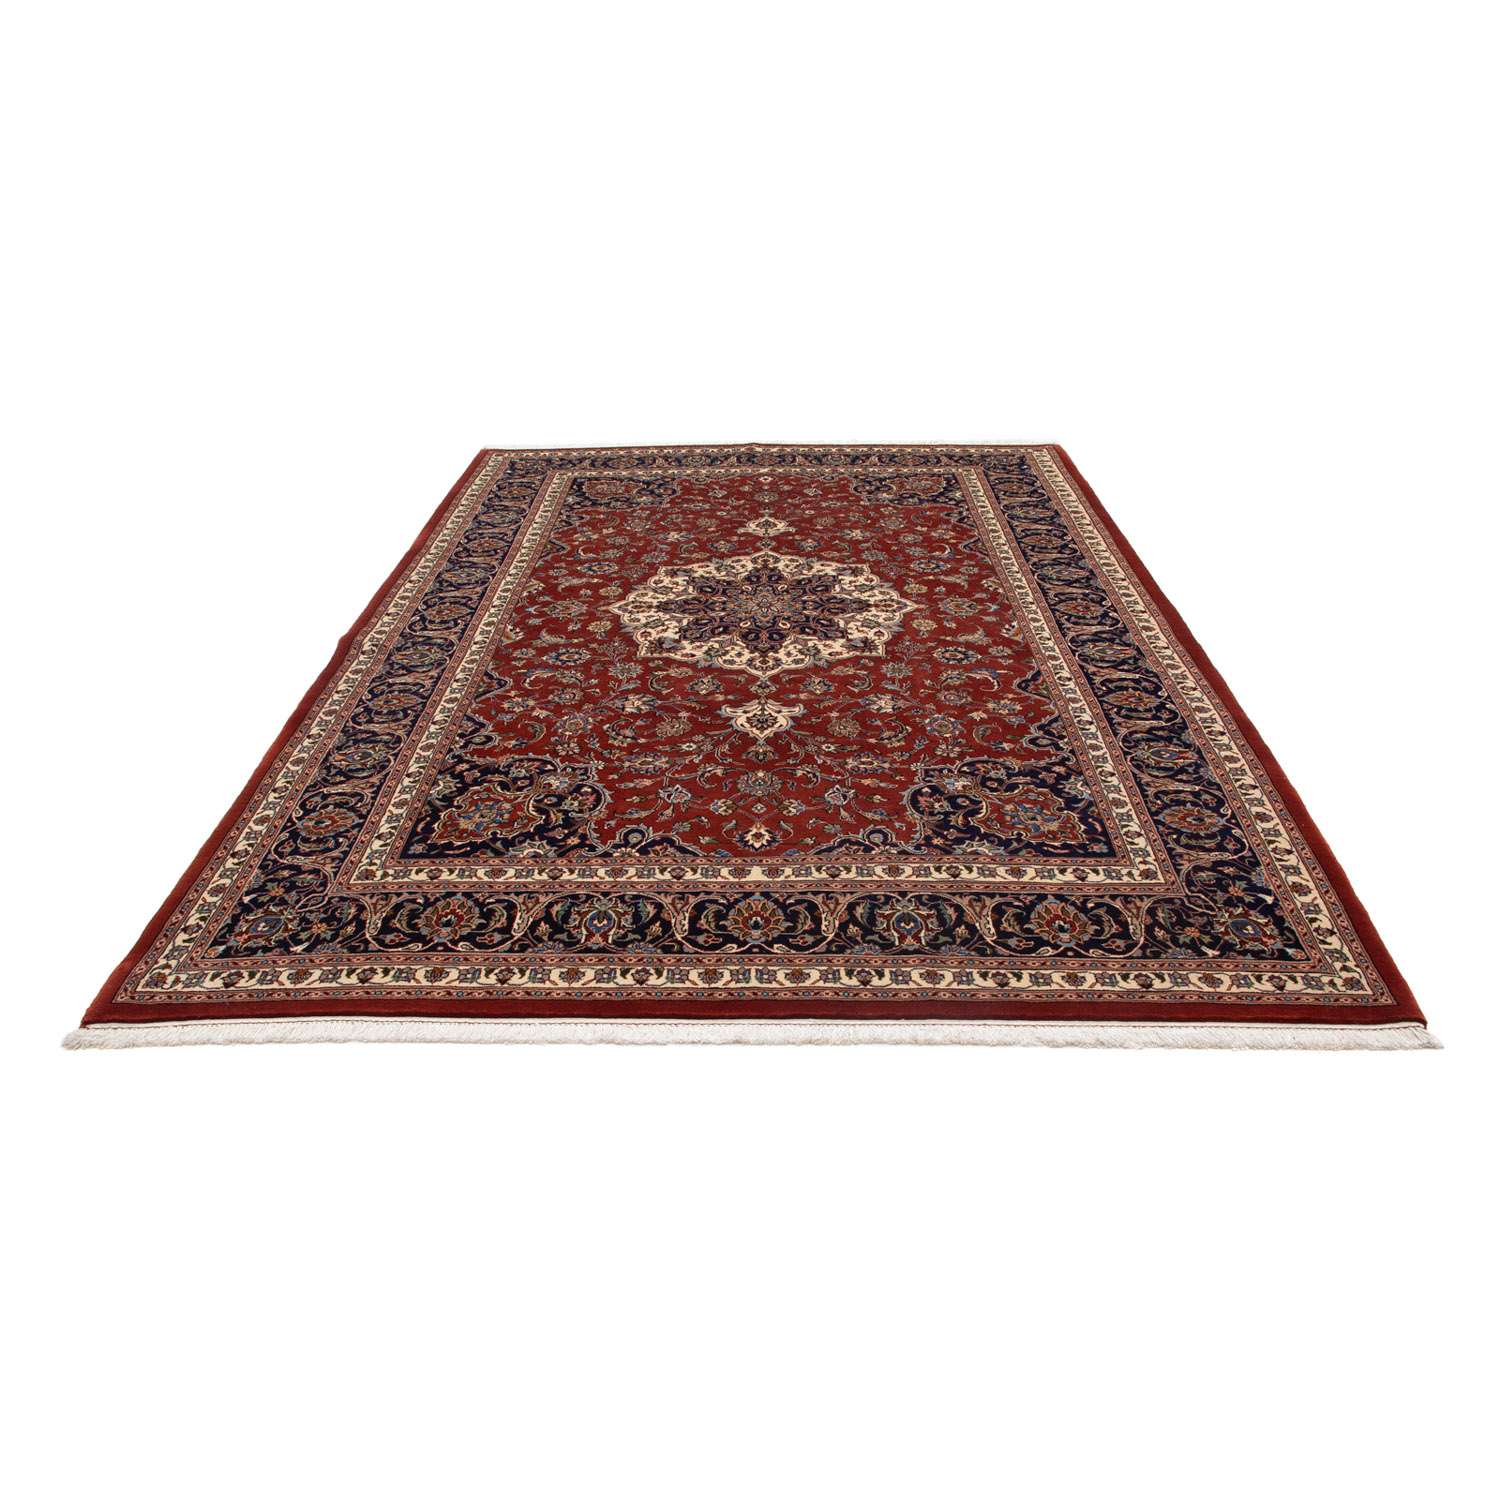 Perser Rug - Classic - 291 x 204 cm - red